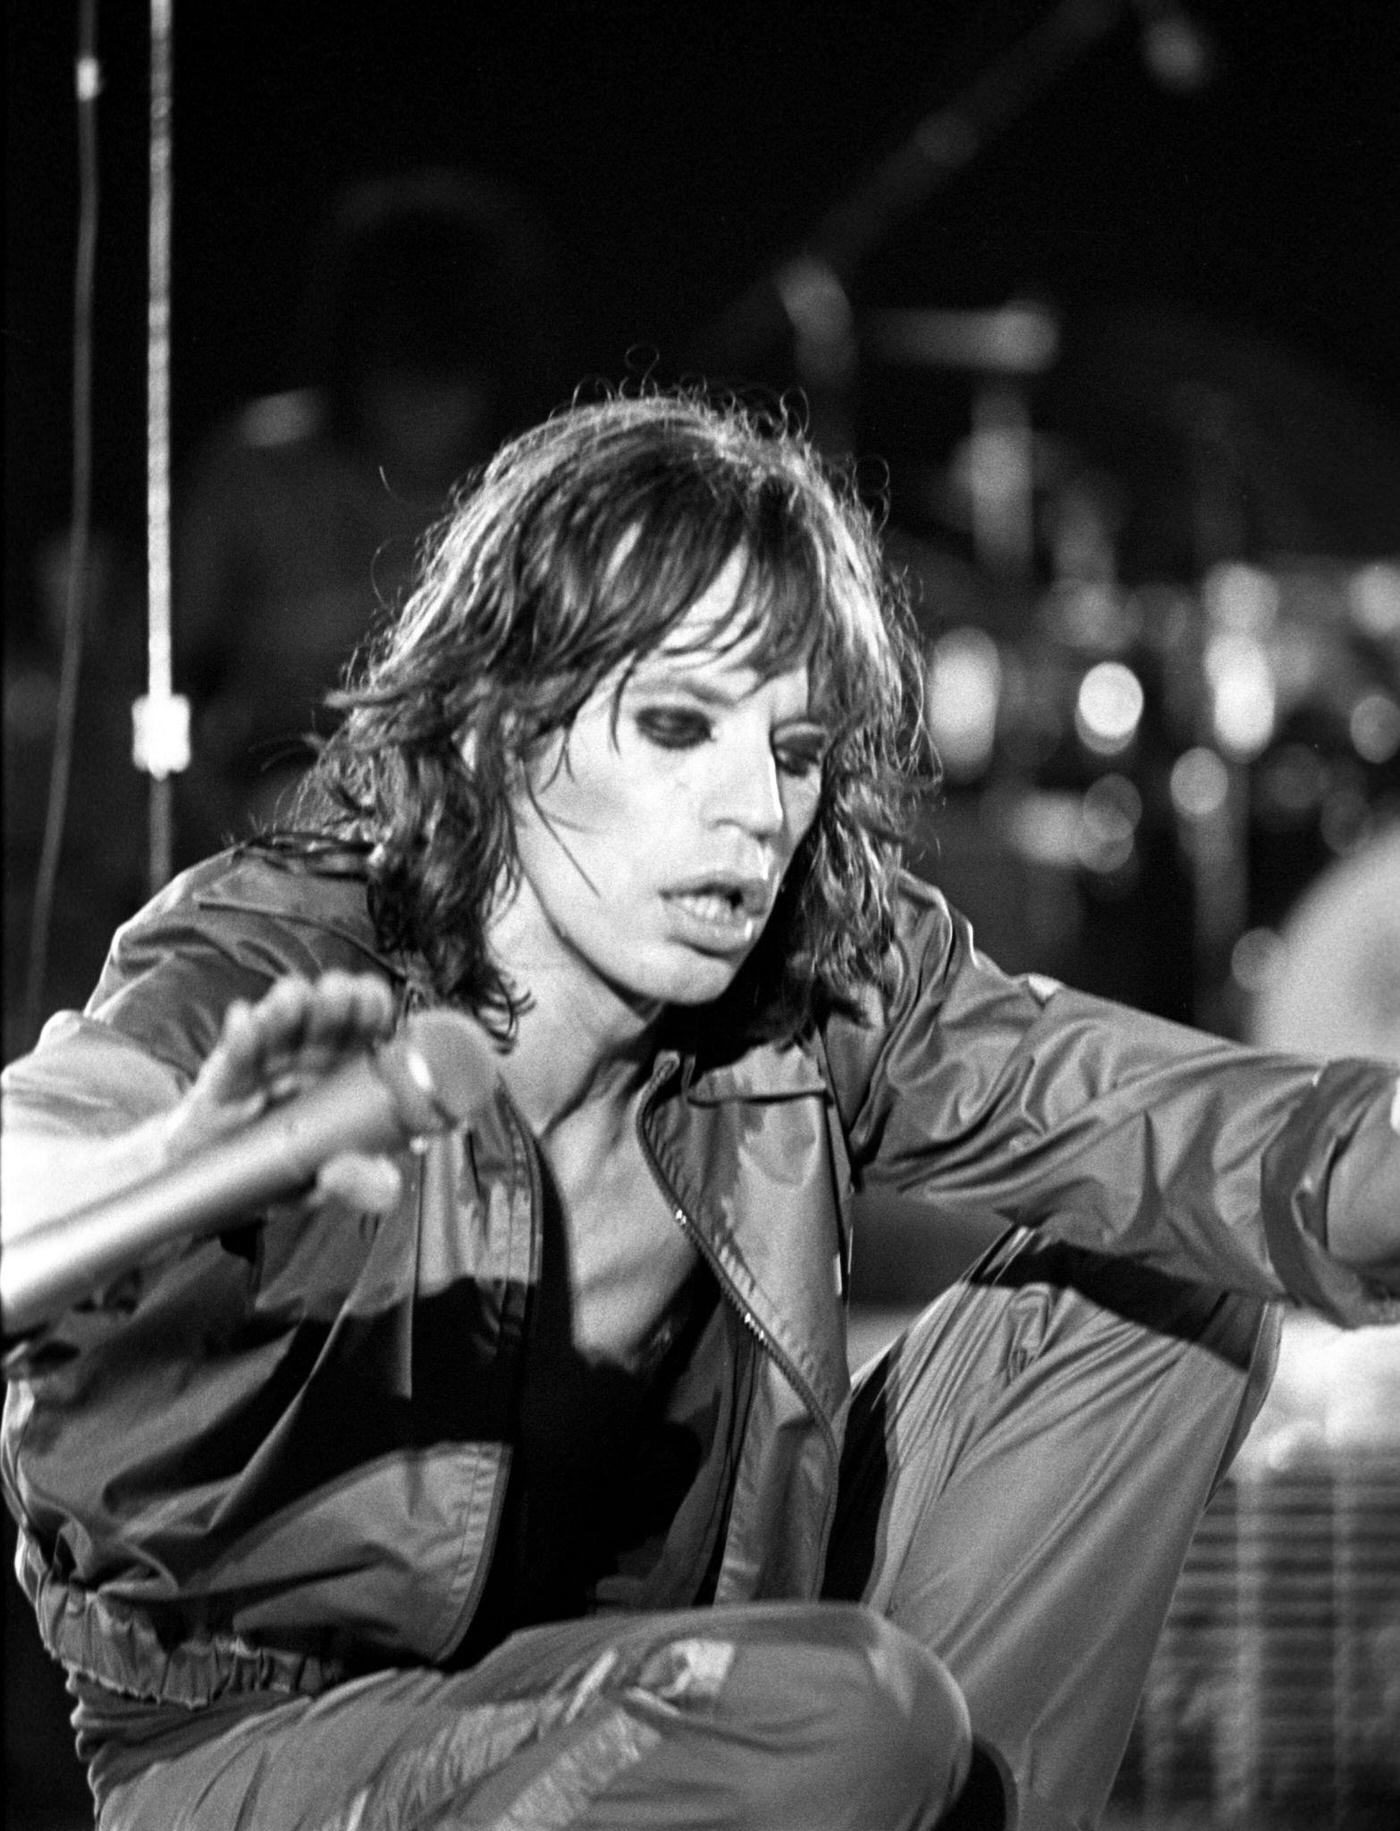 Mick Jagger performs on stage at Madison Square Garden during the band's "Tour of America '75" on July 23, 1975, in New York, New York.